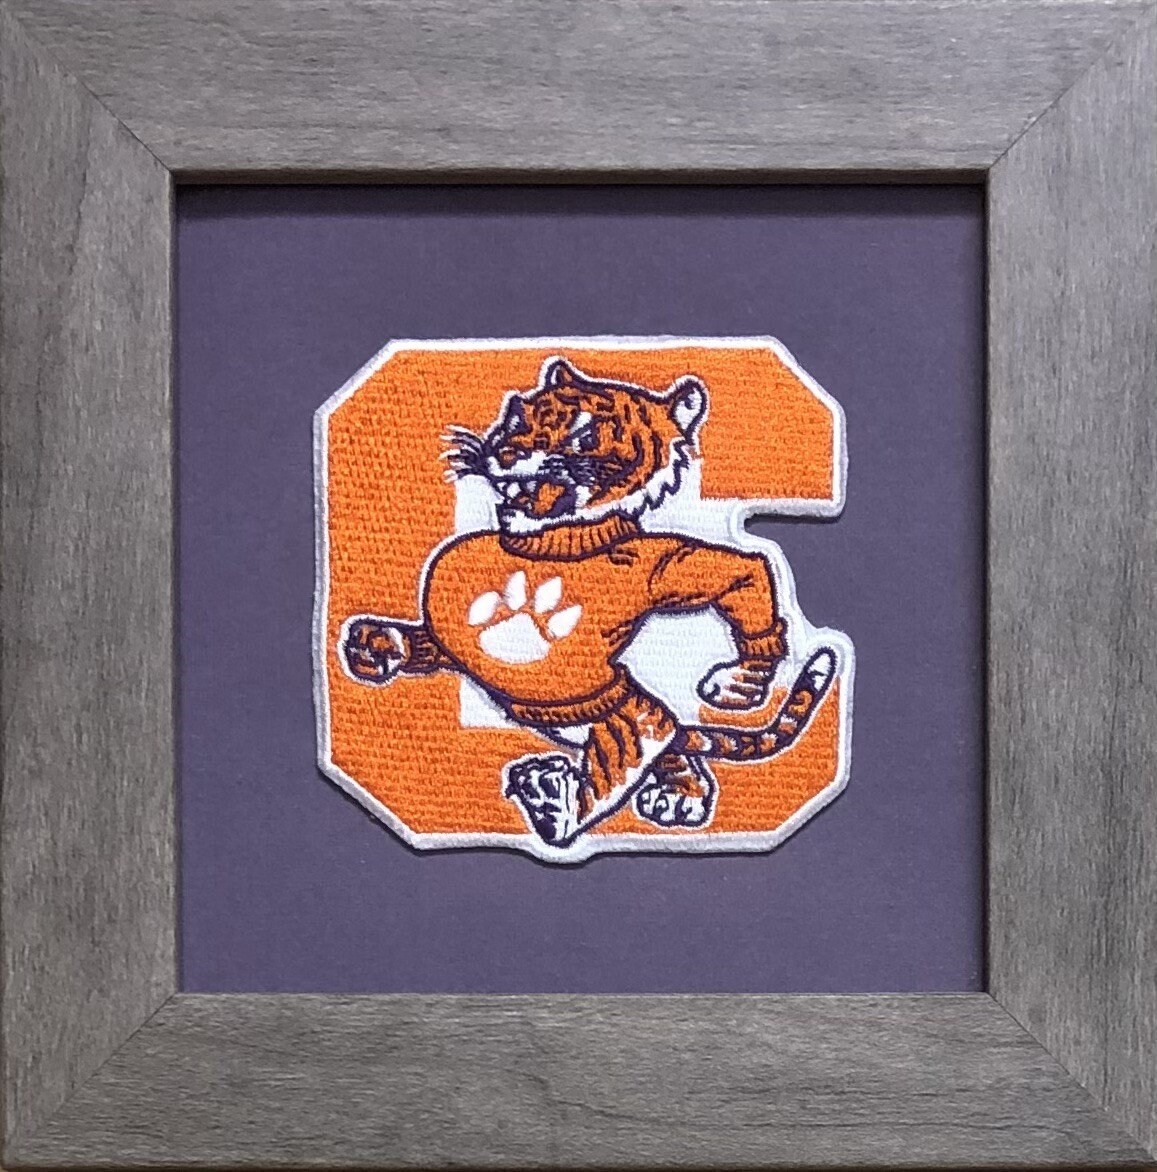 VINTAGE 1970's ORIGINAL CLEMSON TIGERS 3 inch IRON ON LOGO PATCH UNSOLD STOCK 